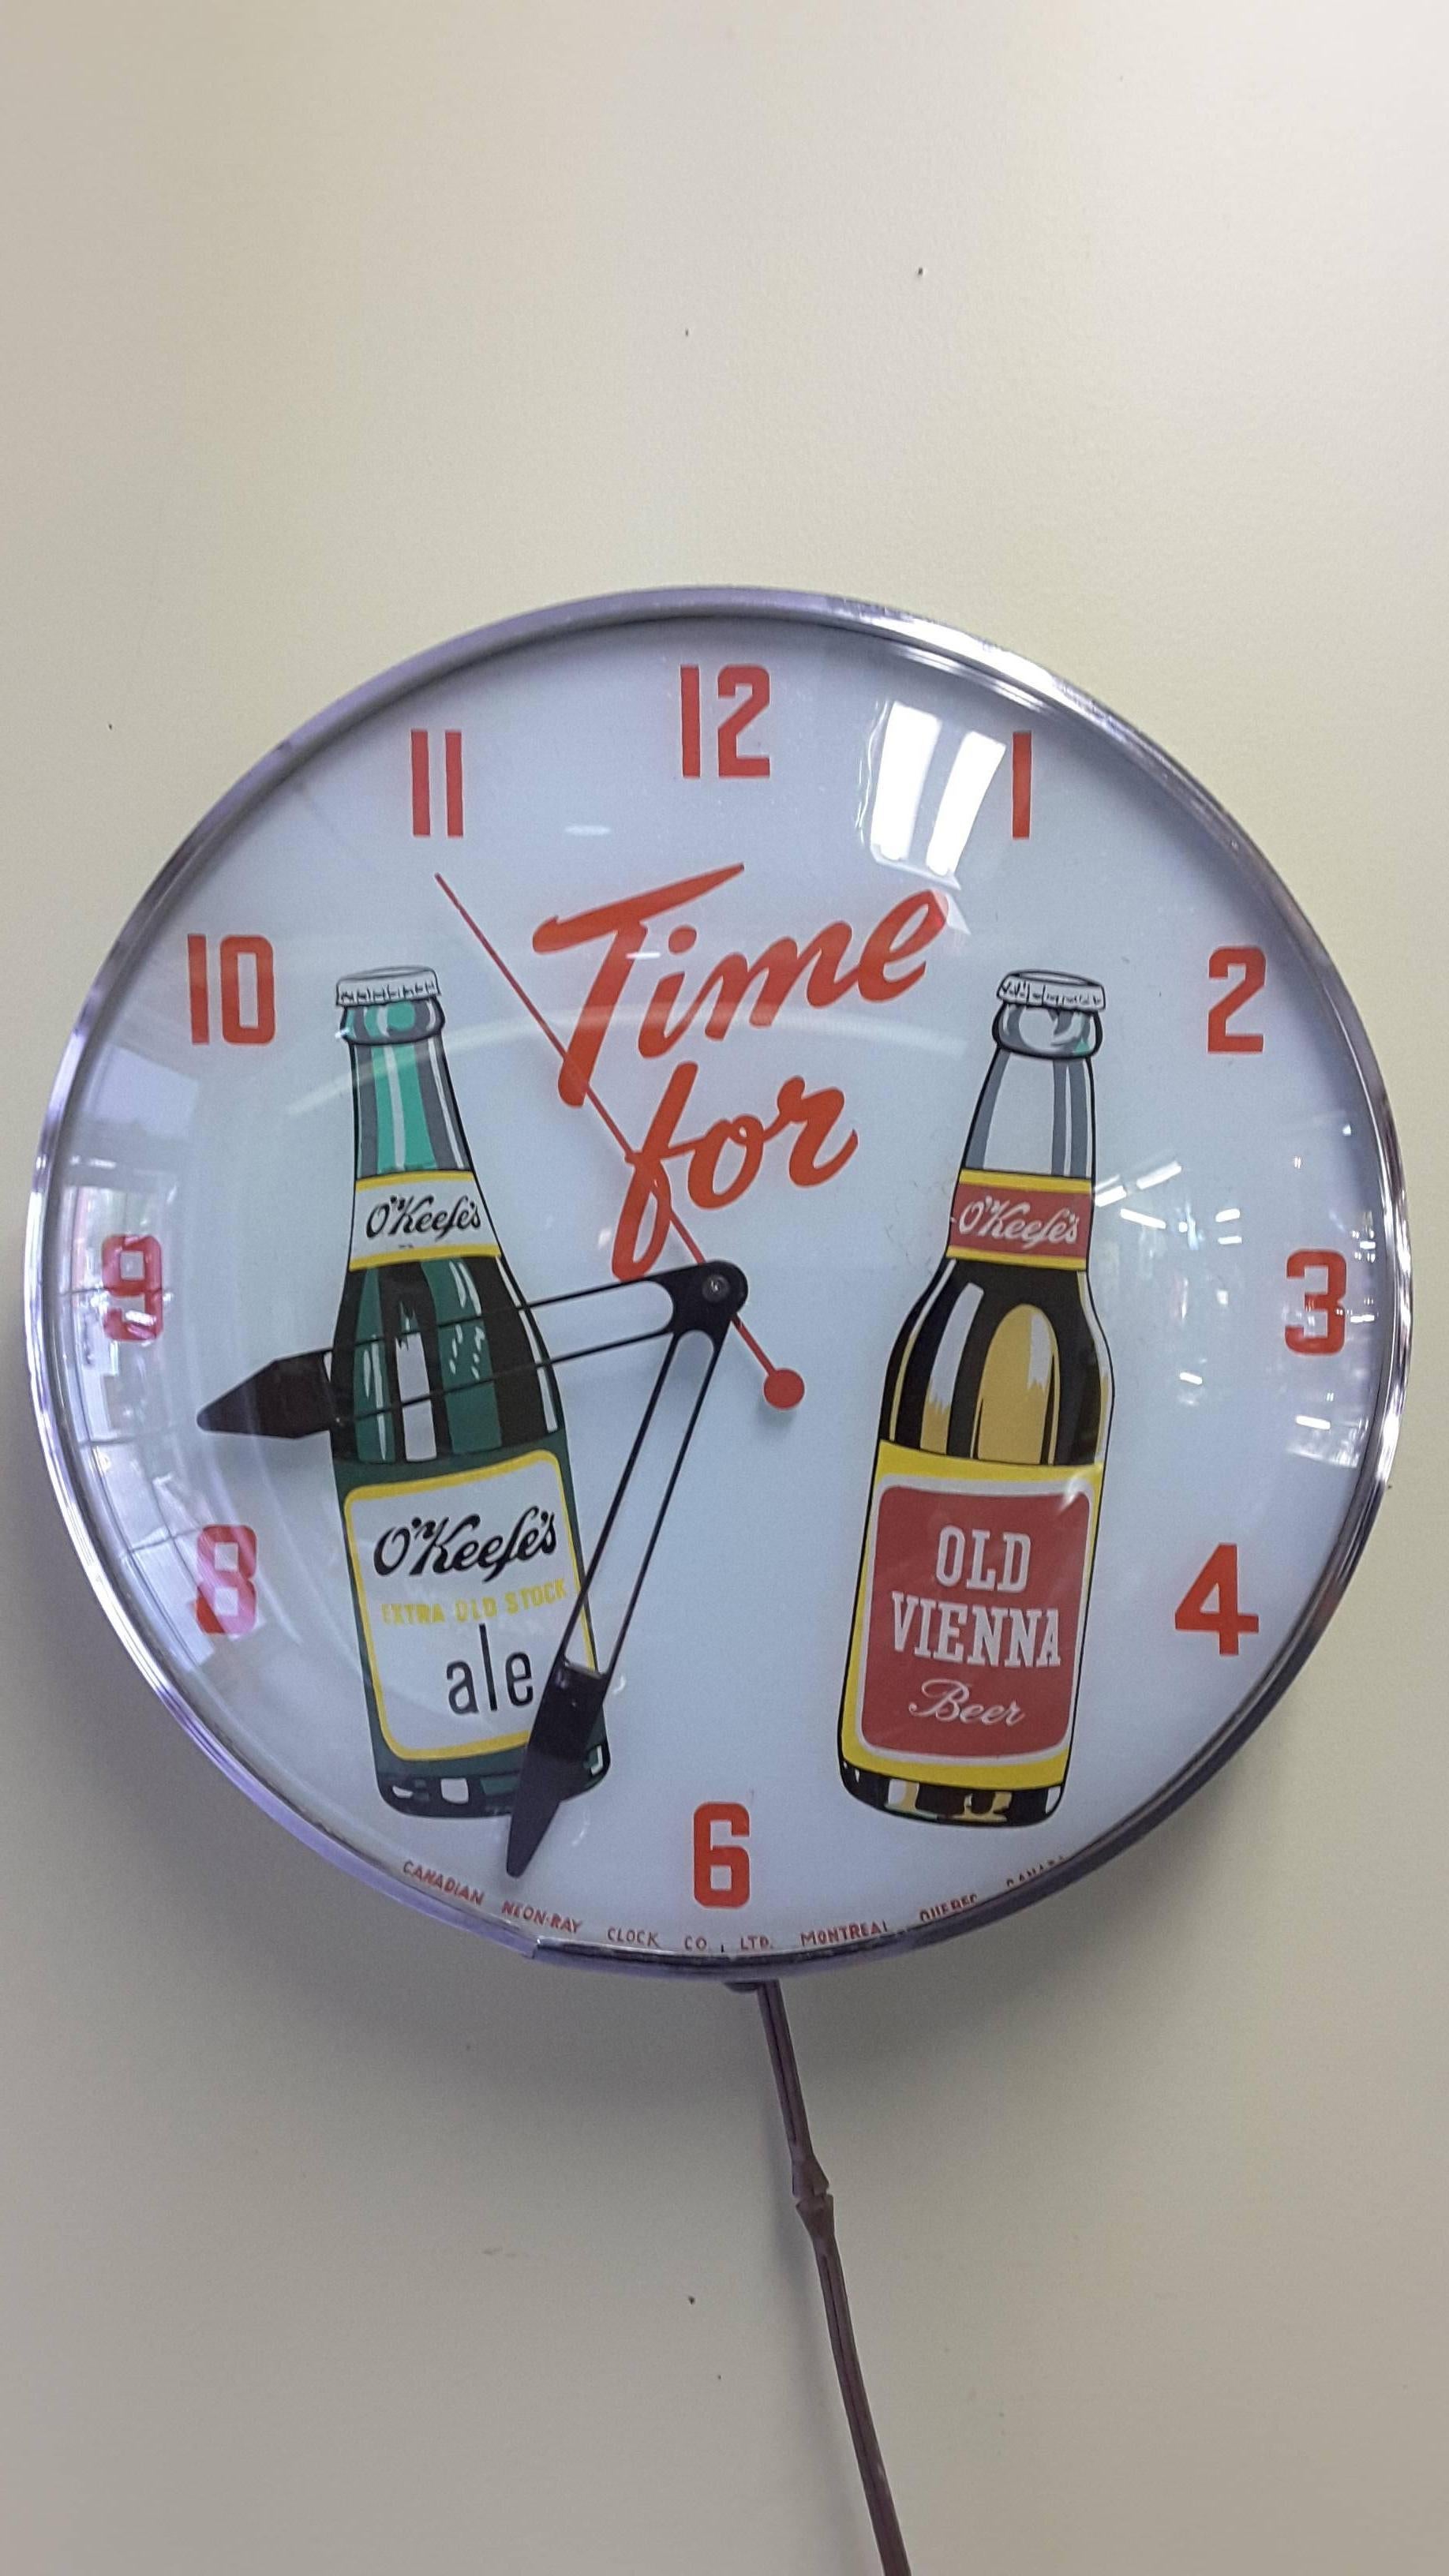 Glass O'keefe's Advertising Clock, Back Lit by Neon-Ray Clock Co.